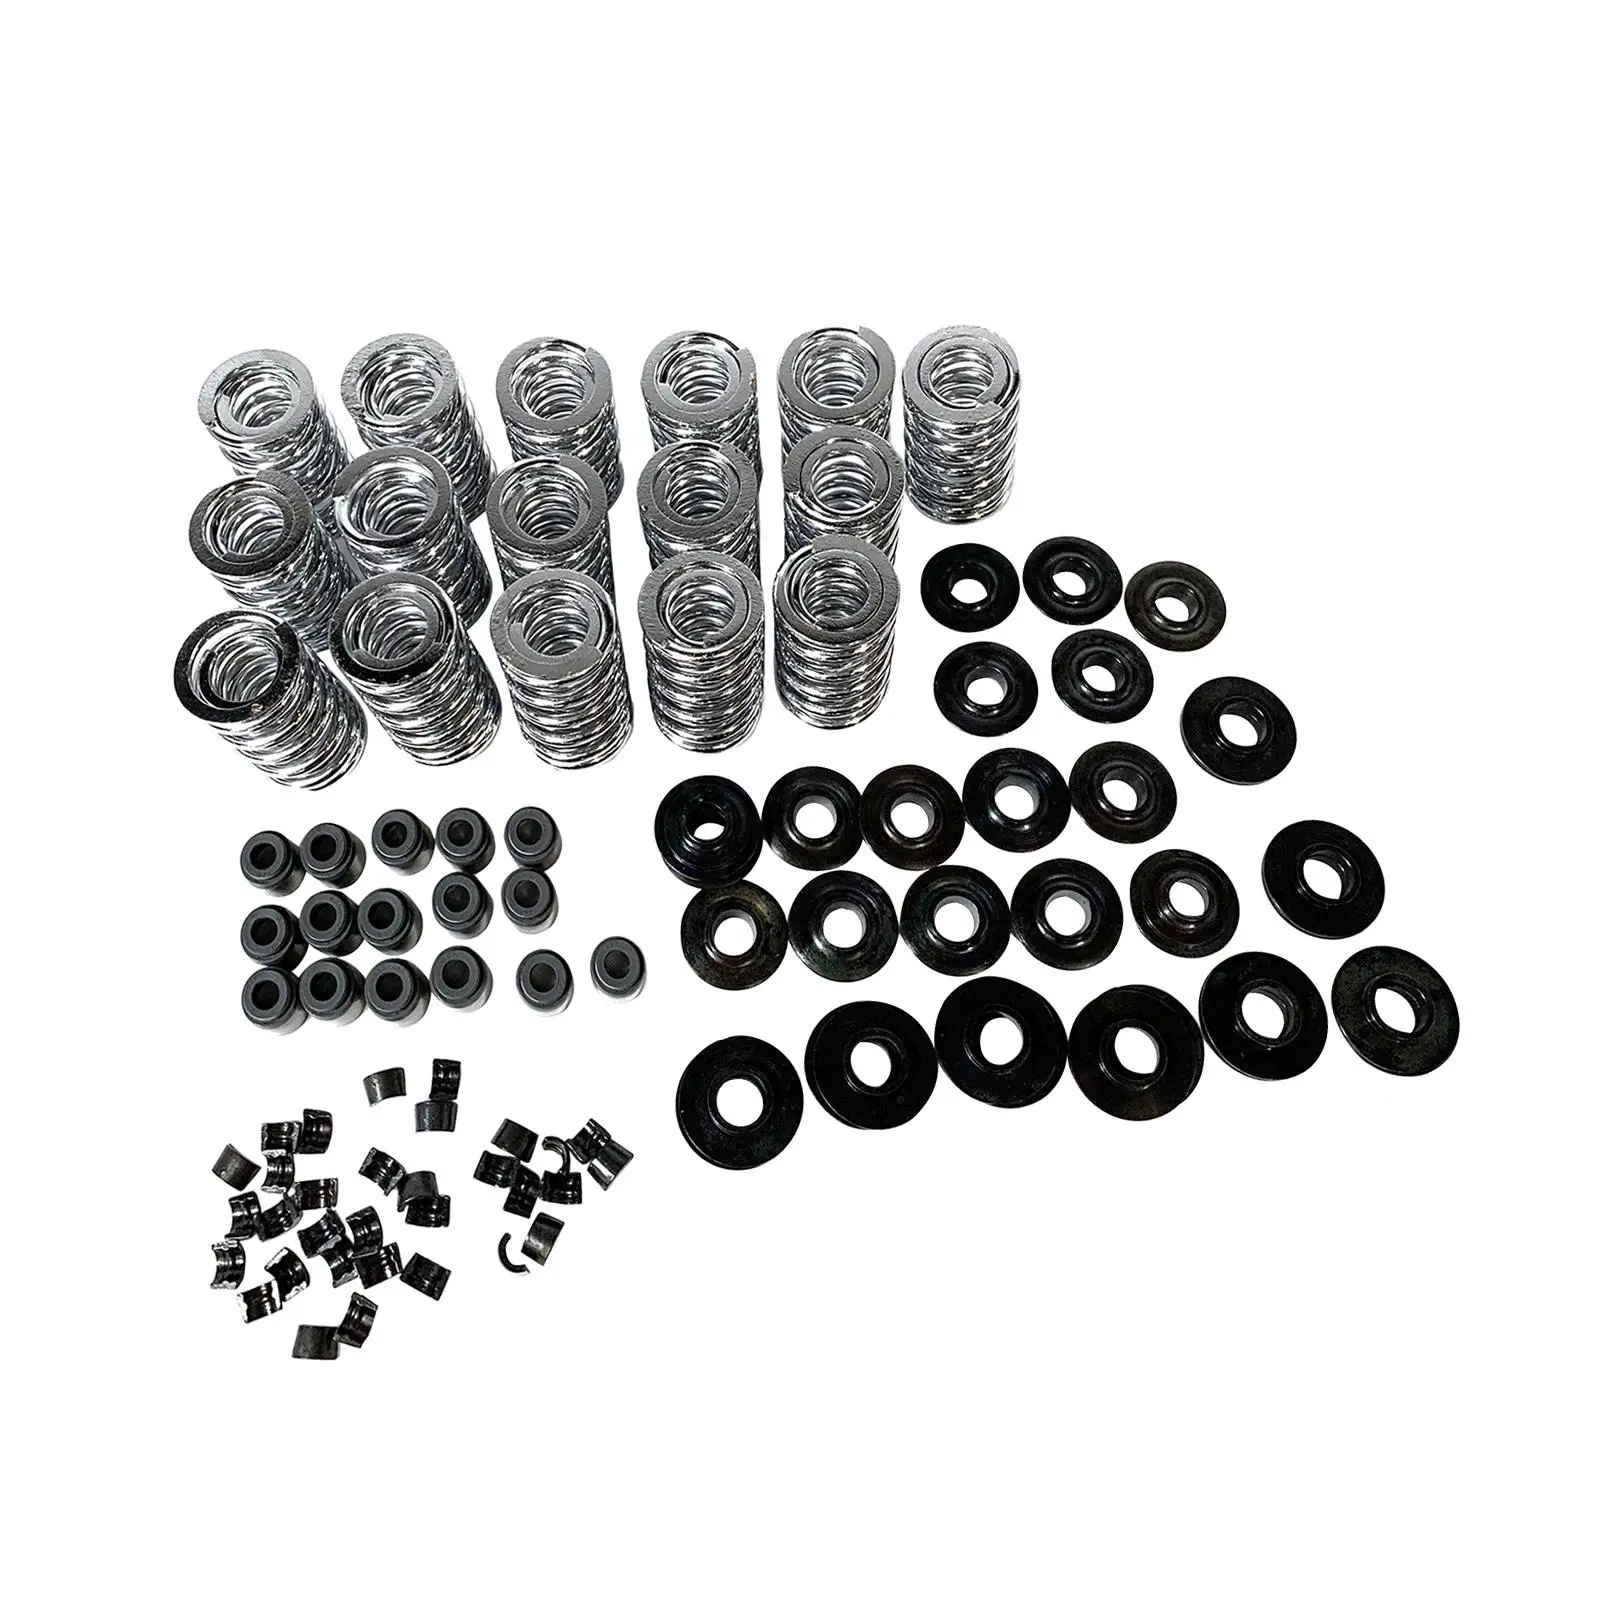 Dual Valve Springs Set Durable Premium Spare Parts High Performance with Retainers Replacement for 4.8 5.3 6.0 LS1 LS2 LS3